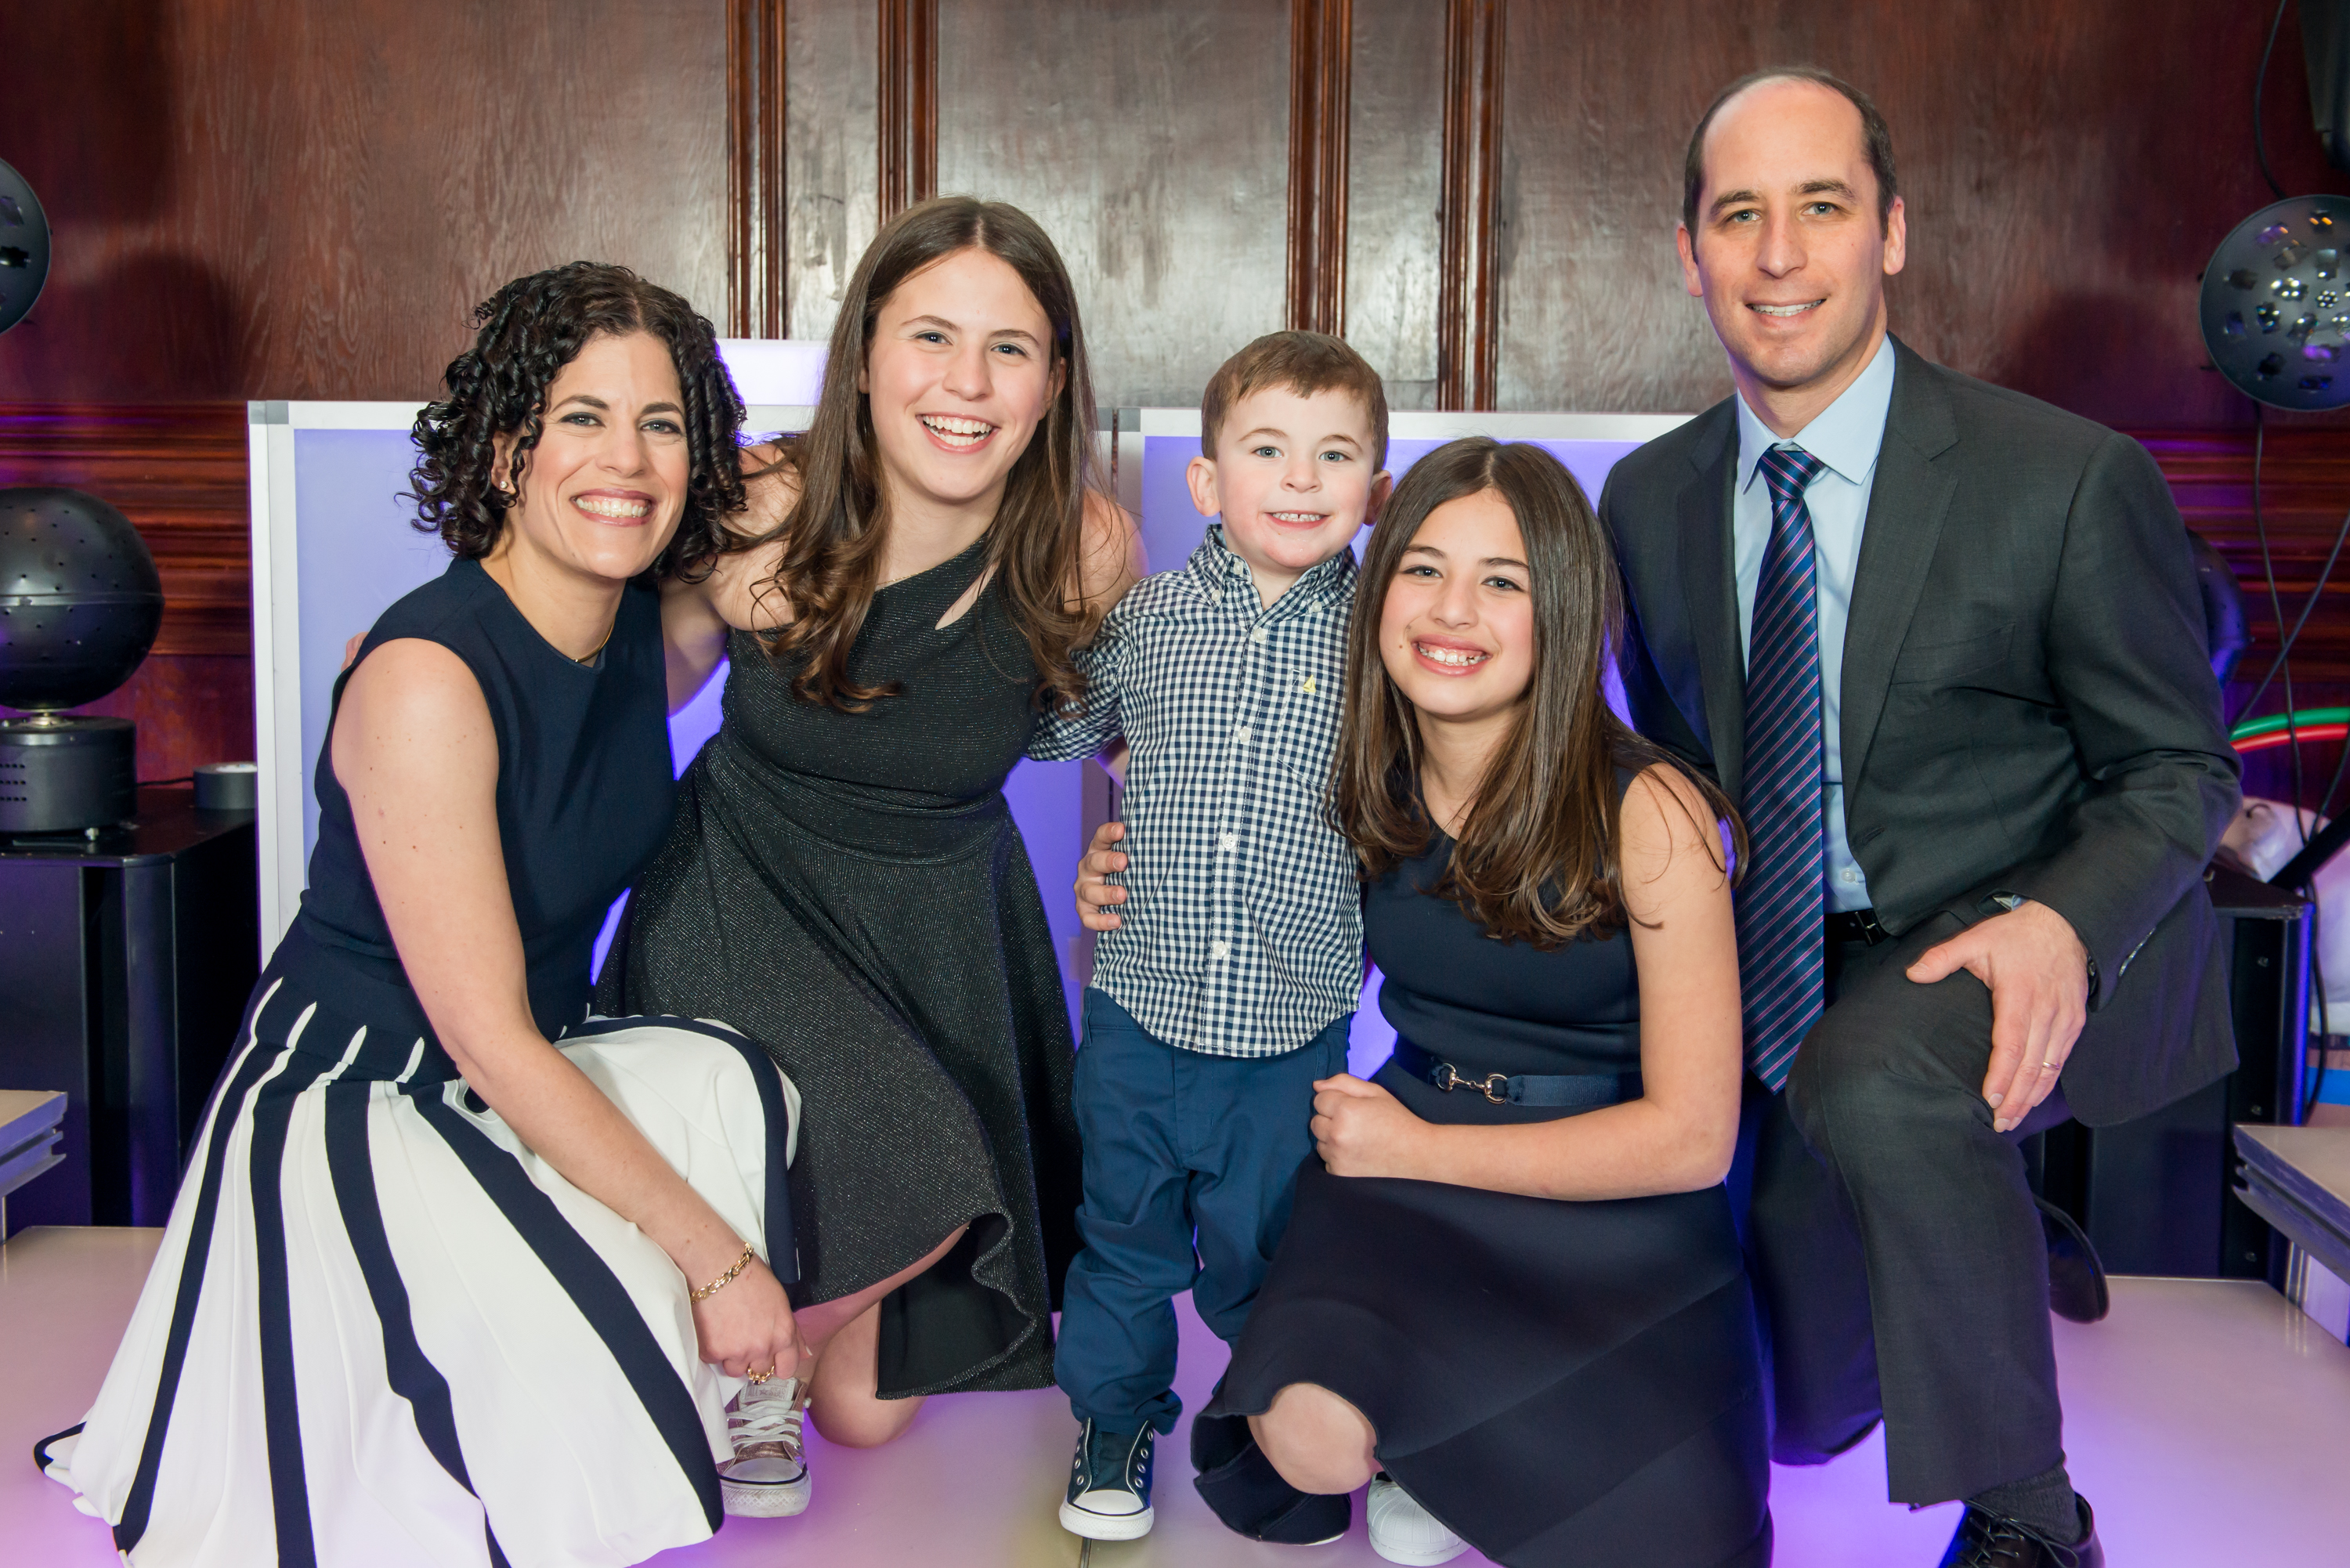 Dr. Altman with her family